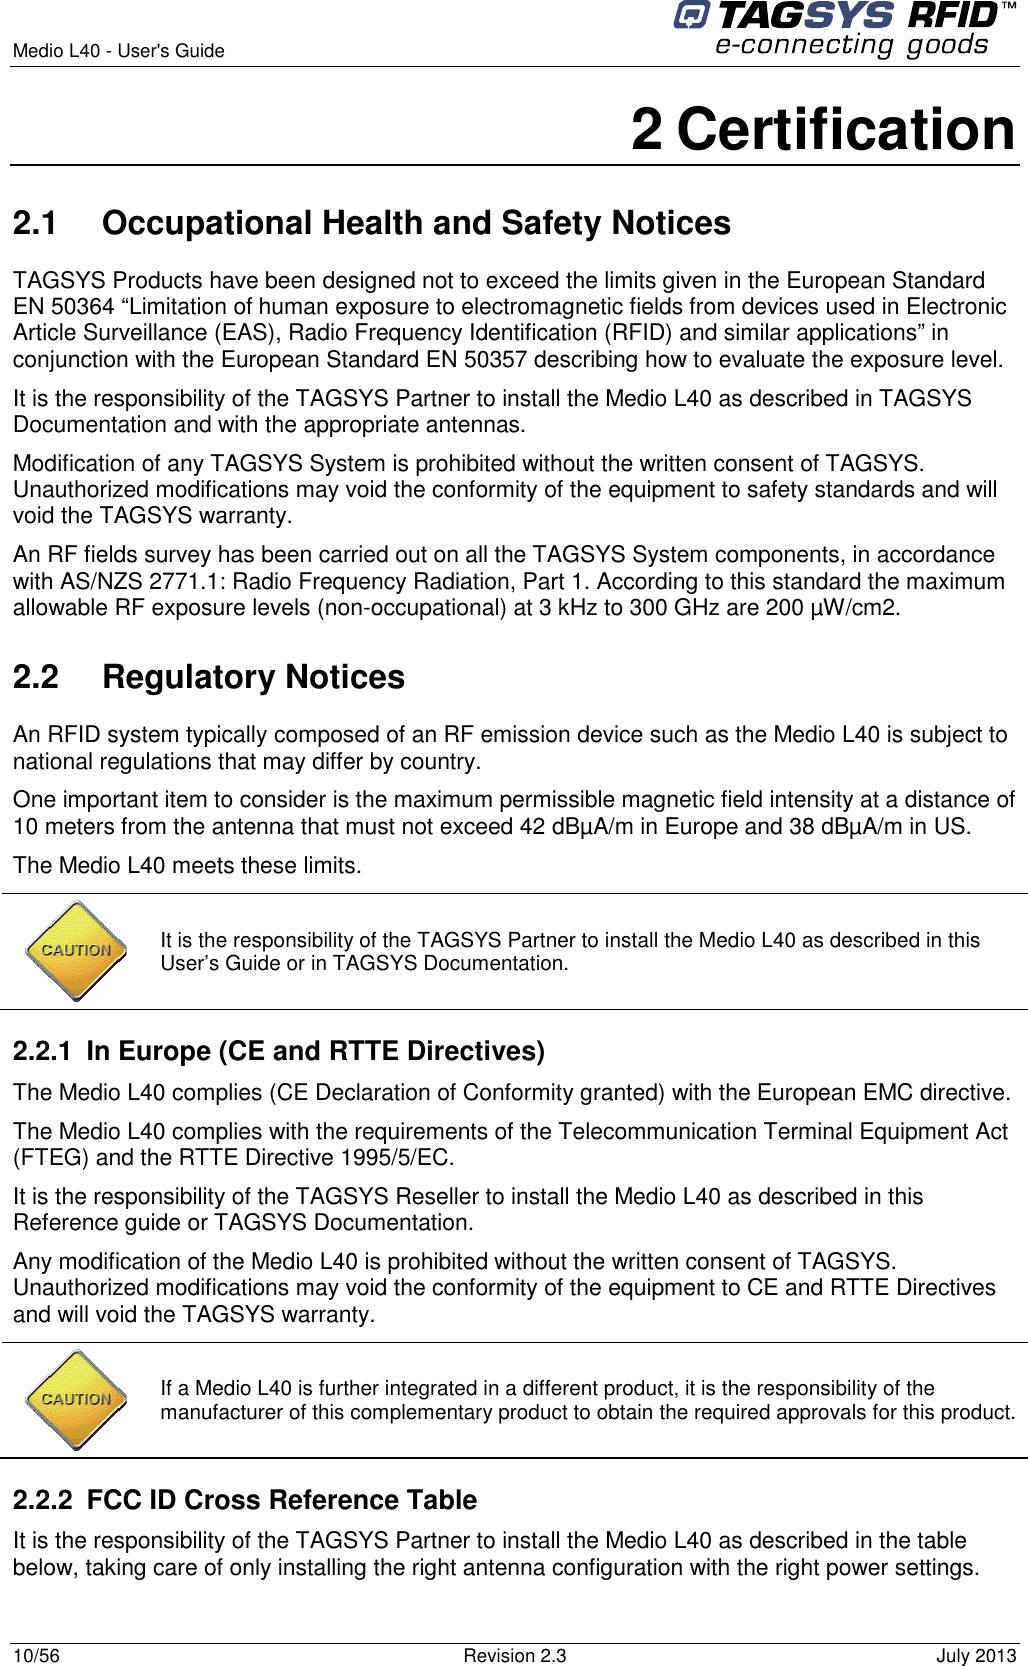  Medio L40 - User&apos;s Guide     10/56  Revision 2.3  July 2013  2 Certification 2.1  Occupational Health and Safety Notices TAGSYS Products have been designed not to exceed the limits given in the European Standard EN 50364 “Limitation of human exposure to electromagnetic fields from devices used in Electronic Article Surveillance (EAS), Radio Frequency Identification (RFID) and similar applications” in conjunction with the European Standard EN 50357 describing how to evaluate the exposure level. It is the responsibility of the TAGSYS Partner to install the Medio L40 as described in TAGSYS Documentation and with the appropriate antennas.  Modification of any TAGSYS System is prohibited without the written consent of TAGSYS. Unauthorized modifications may void the conformity of the equipment to safety standards and will void the TAGSYS warranty. An RF fields survey has been carried out on all the TAGSYS System components, in accordance with AS/NZS 2771.1: Radio Frequency Radiation, Part 1. According to this standard the maximum allowable RF exposure levels (non-occupational) at 3 kHz to 300 GHz are 200 µW/cm2.  2.2  Regulatory Notices An RFID system typically composed of an RF emission device such as the Medio L40 is subject to national regulations that may differ by country. One important item to consider is the maximum permissible magnetic field intensity at a distance of 10 meters from the antenna that must not exceed 42 dBµA/m in Europe and 38 dBµA/m in US. The Medio L40 meets these limits.  2.2.1  In Europe (CE and RTTE Directives)  The Medio L40 complies (CE Declaration of Conformity granted) with the European EMC directive. The Medio L40 complies with the requirements of the Telecommunication Terminal Equipment Act (FTEG) and the RTTE Directive 1995/5/EC. It is the responsibility of the TAGSYS Reseller to install the Medio L40 as described in this Reference guide or TAGSYS Documentation. Any modification of the Medio L40 is prohibited without the written consent of TAGSYS. Unauthorized modifications may void the conformity of the equipment to CE and RTTE Directives and will void the TAGSYS warranty.  2.2.2  FCC ID Cross Reference Table It is the responsibility of the TAGSYS Partner to install the Medio L40 as described in the table below, taking care of only installing the right antenna configuration with the right power settings.  It is the responsibility of the TAGSYS Partner to install the Medio L40 as described in this User’s Guide or in TAGSYS Documentation.  If a Medio L40 is further integrated in a different product, it is the responsibility of the manufacturer of this complementary product to obtain the required approvals for this product. 